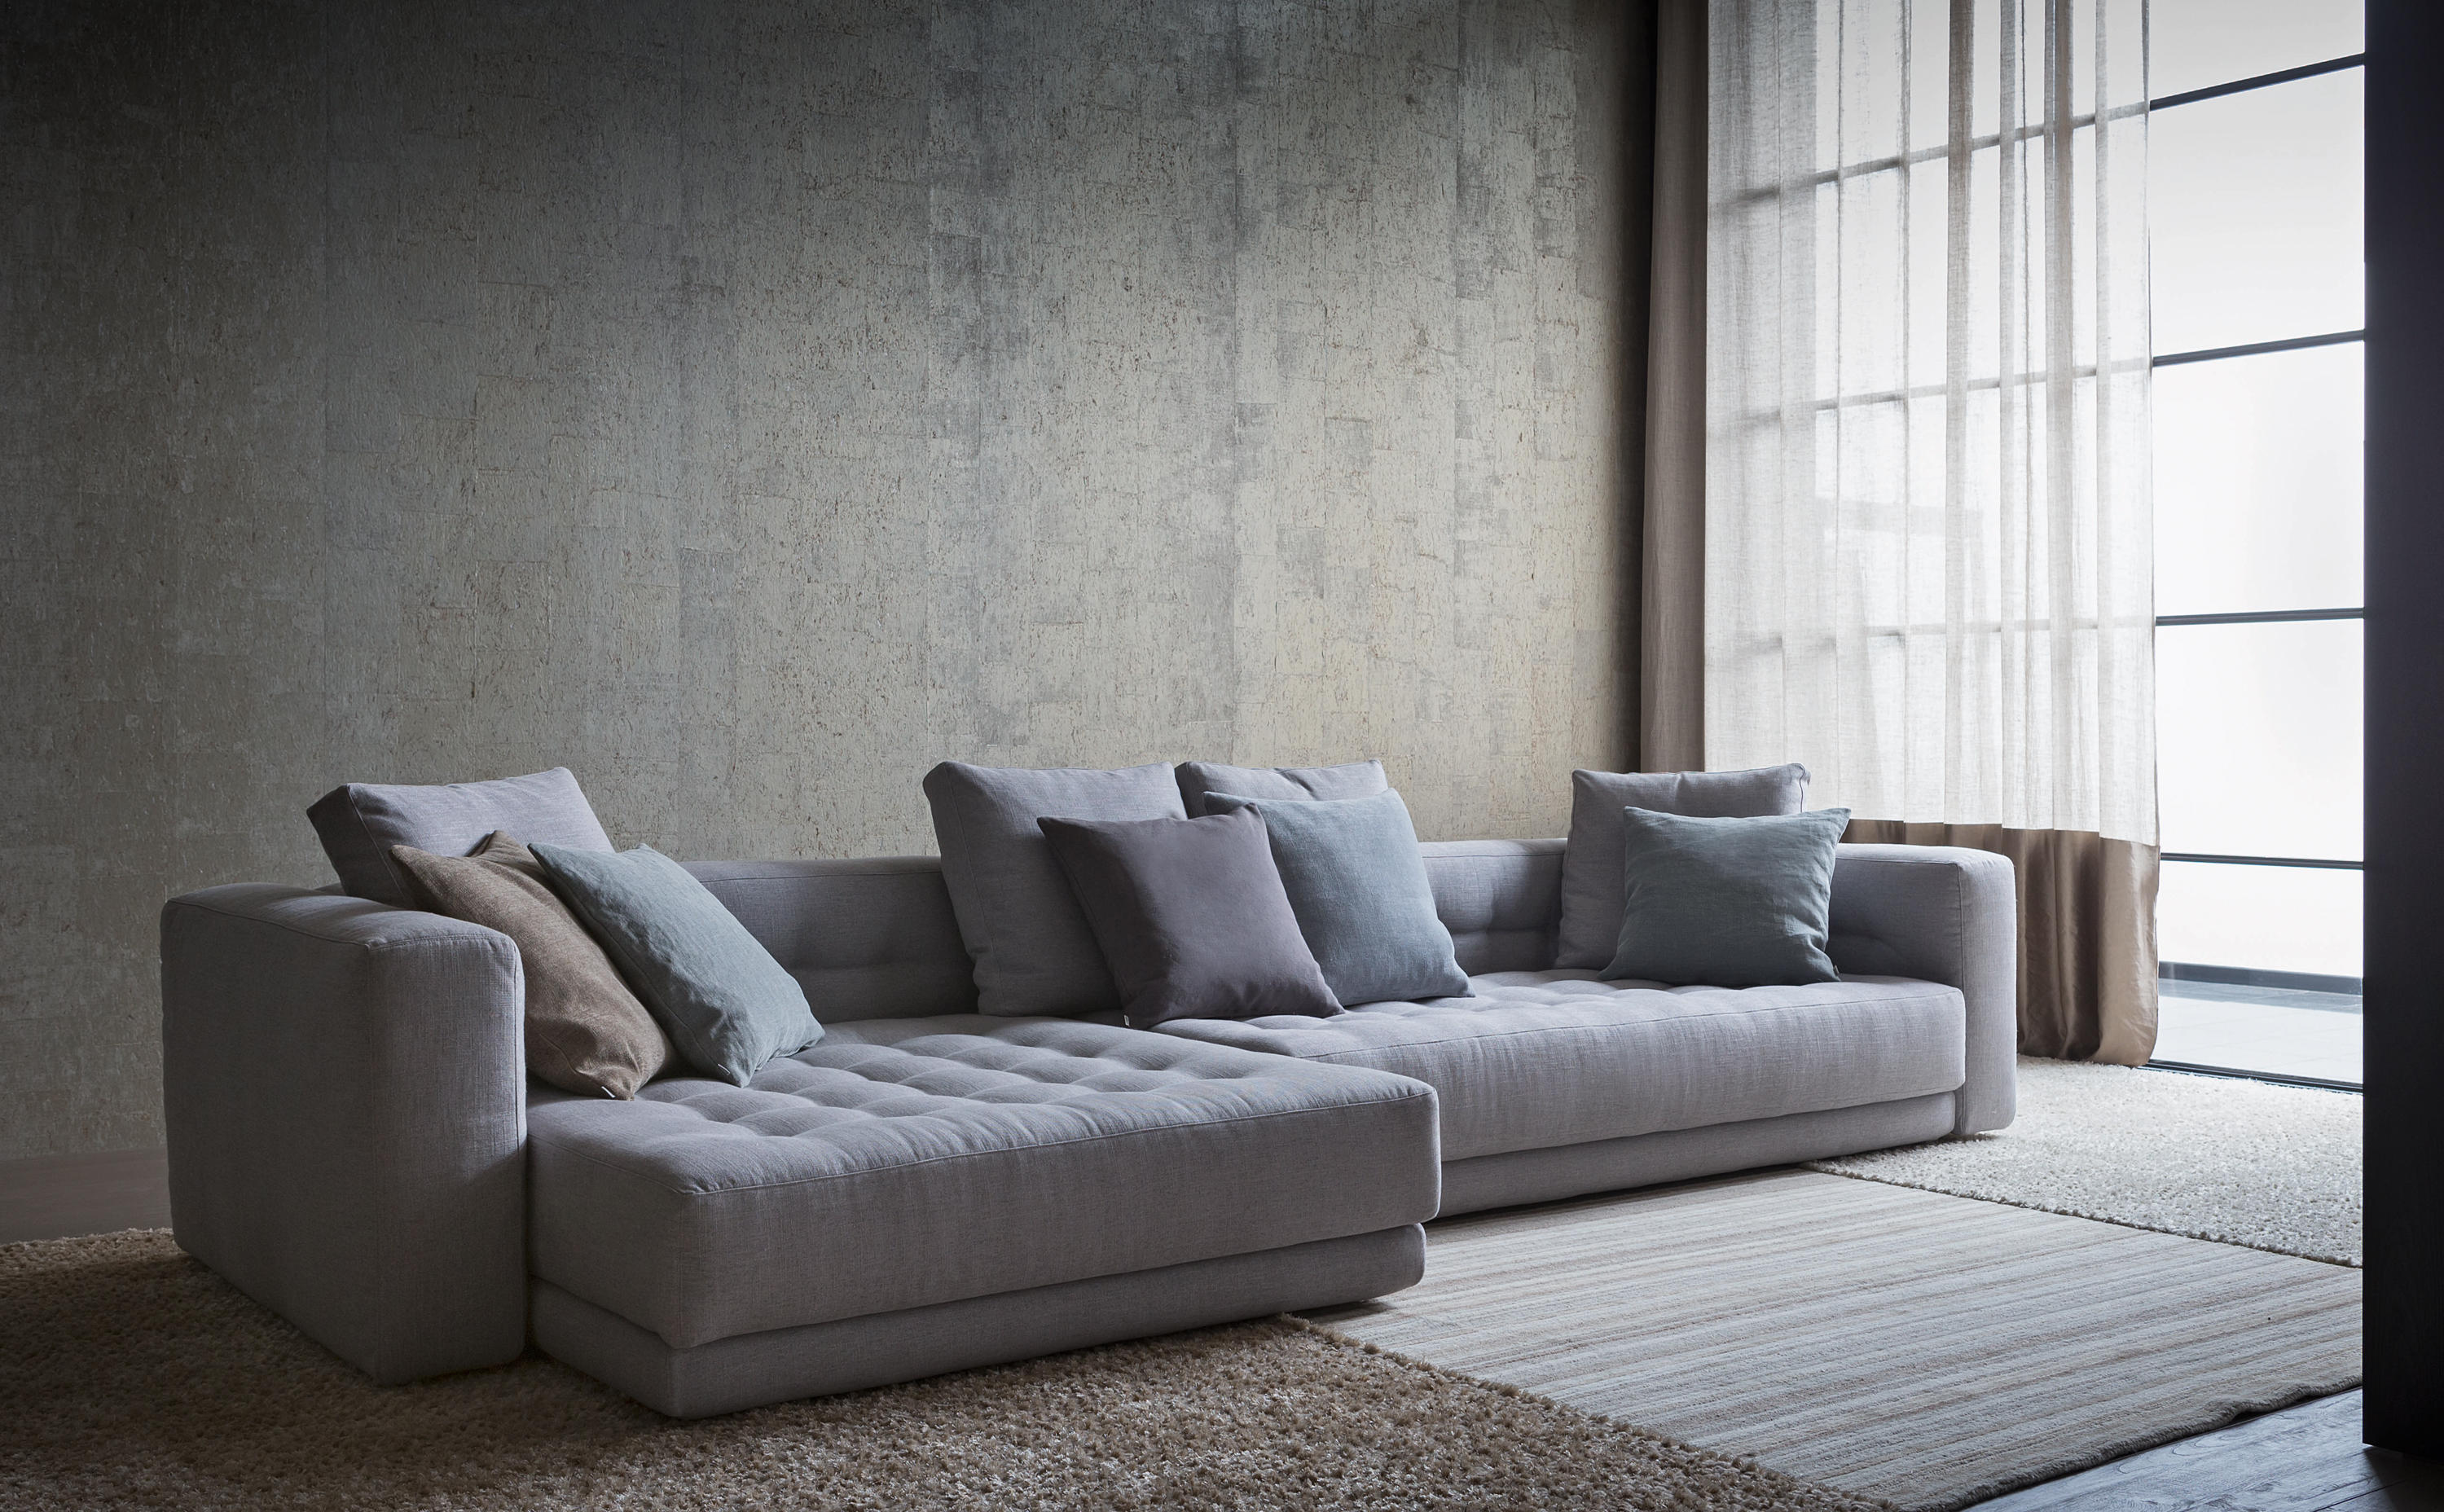 DOZE A MODULAR SYSTEM OF FORT Modular sofa systems from Flou